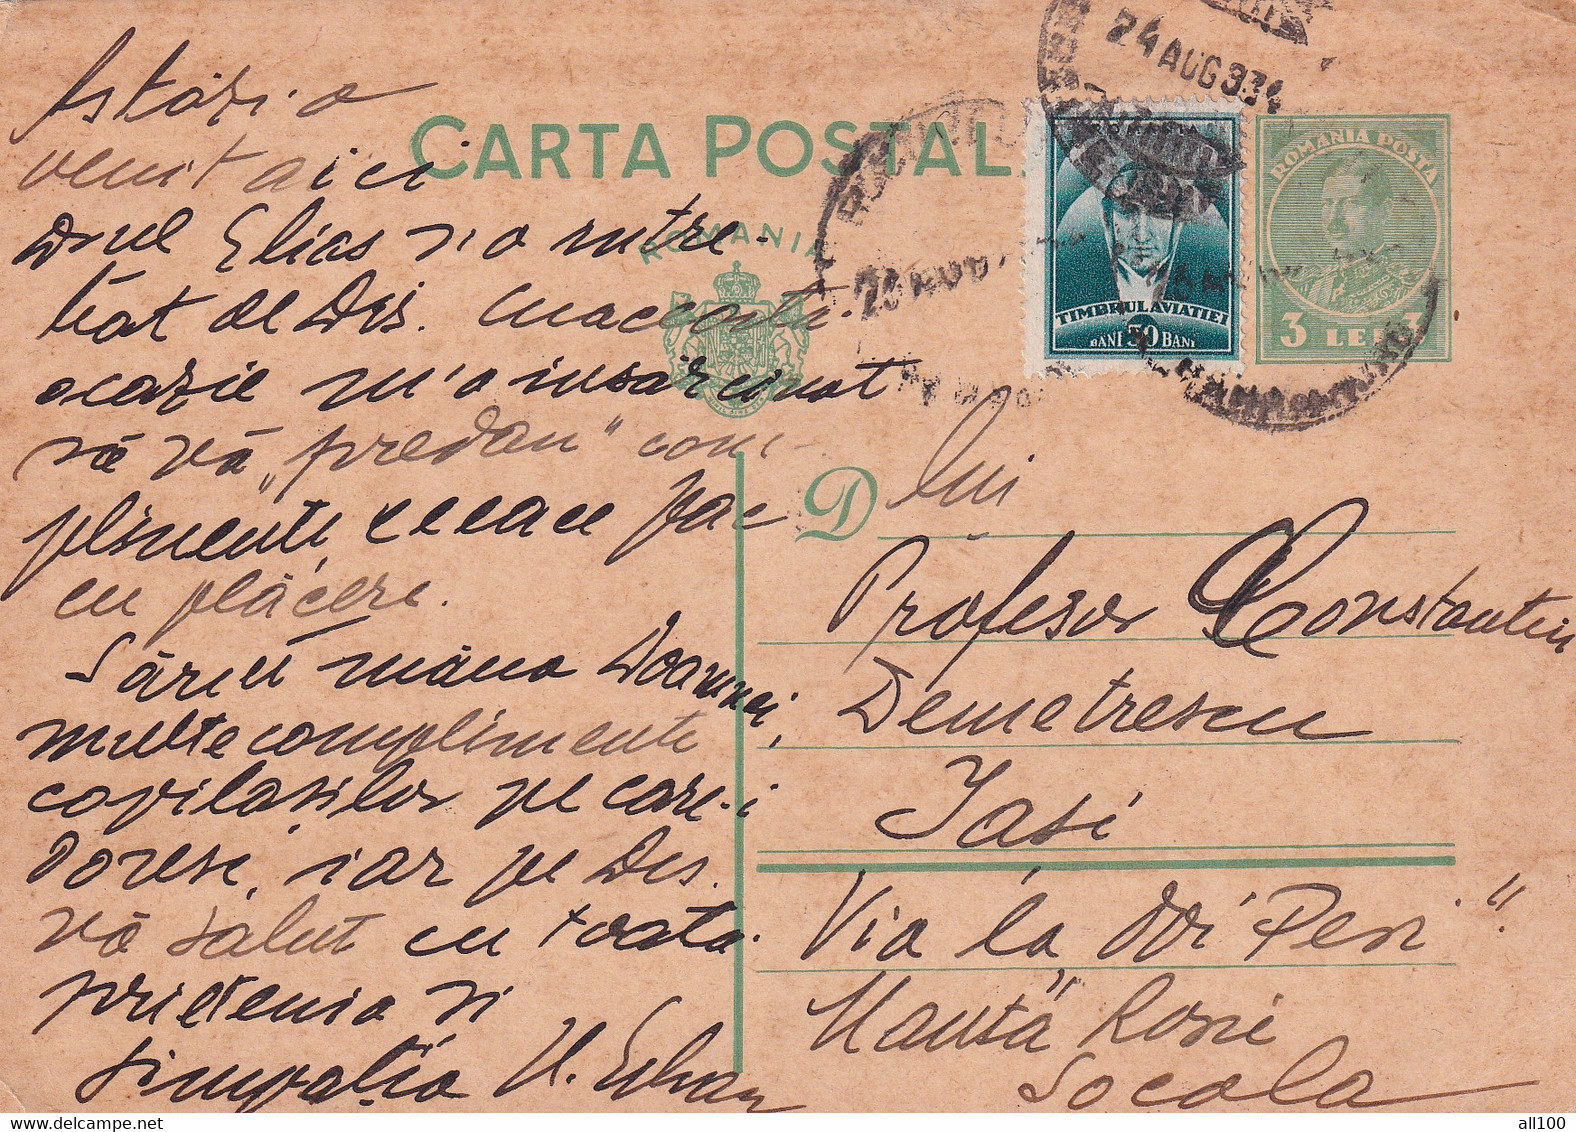 A16524 - POSTAL STATIONERY 1934 STAMP  KING MICHAEL STAMP 3 LEI  AVIATION STAMP - Covers & Documents